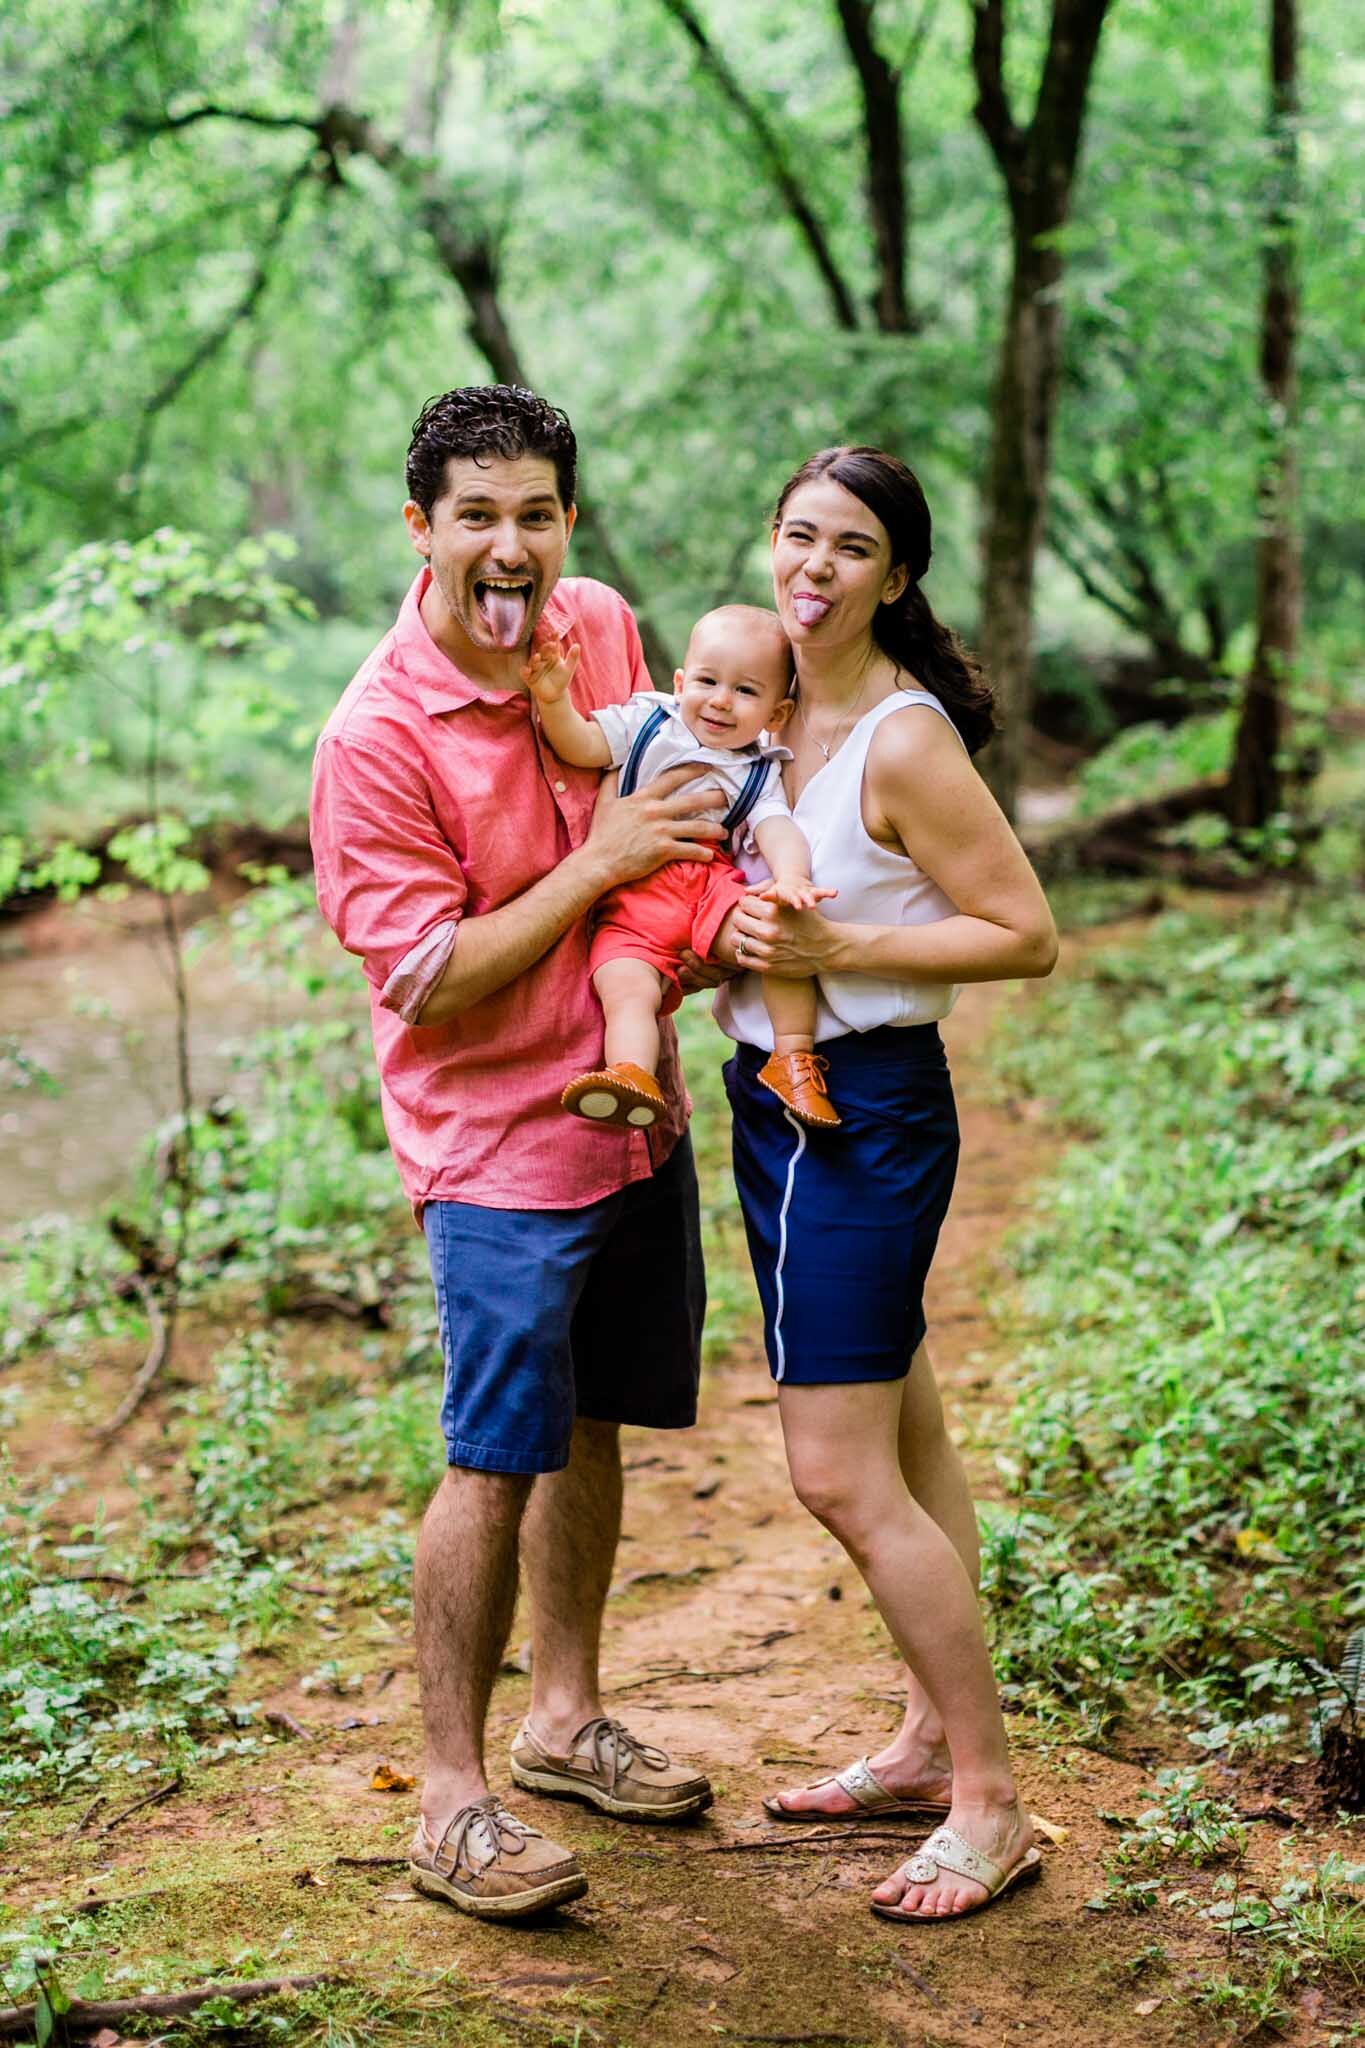 Raleigh Family Photographer | By G. Lin Photography | Family photo with parents sticking out tongues